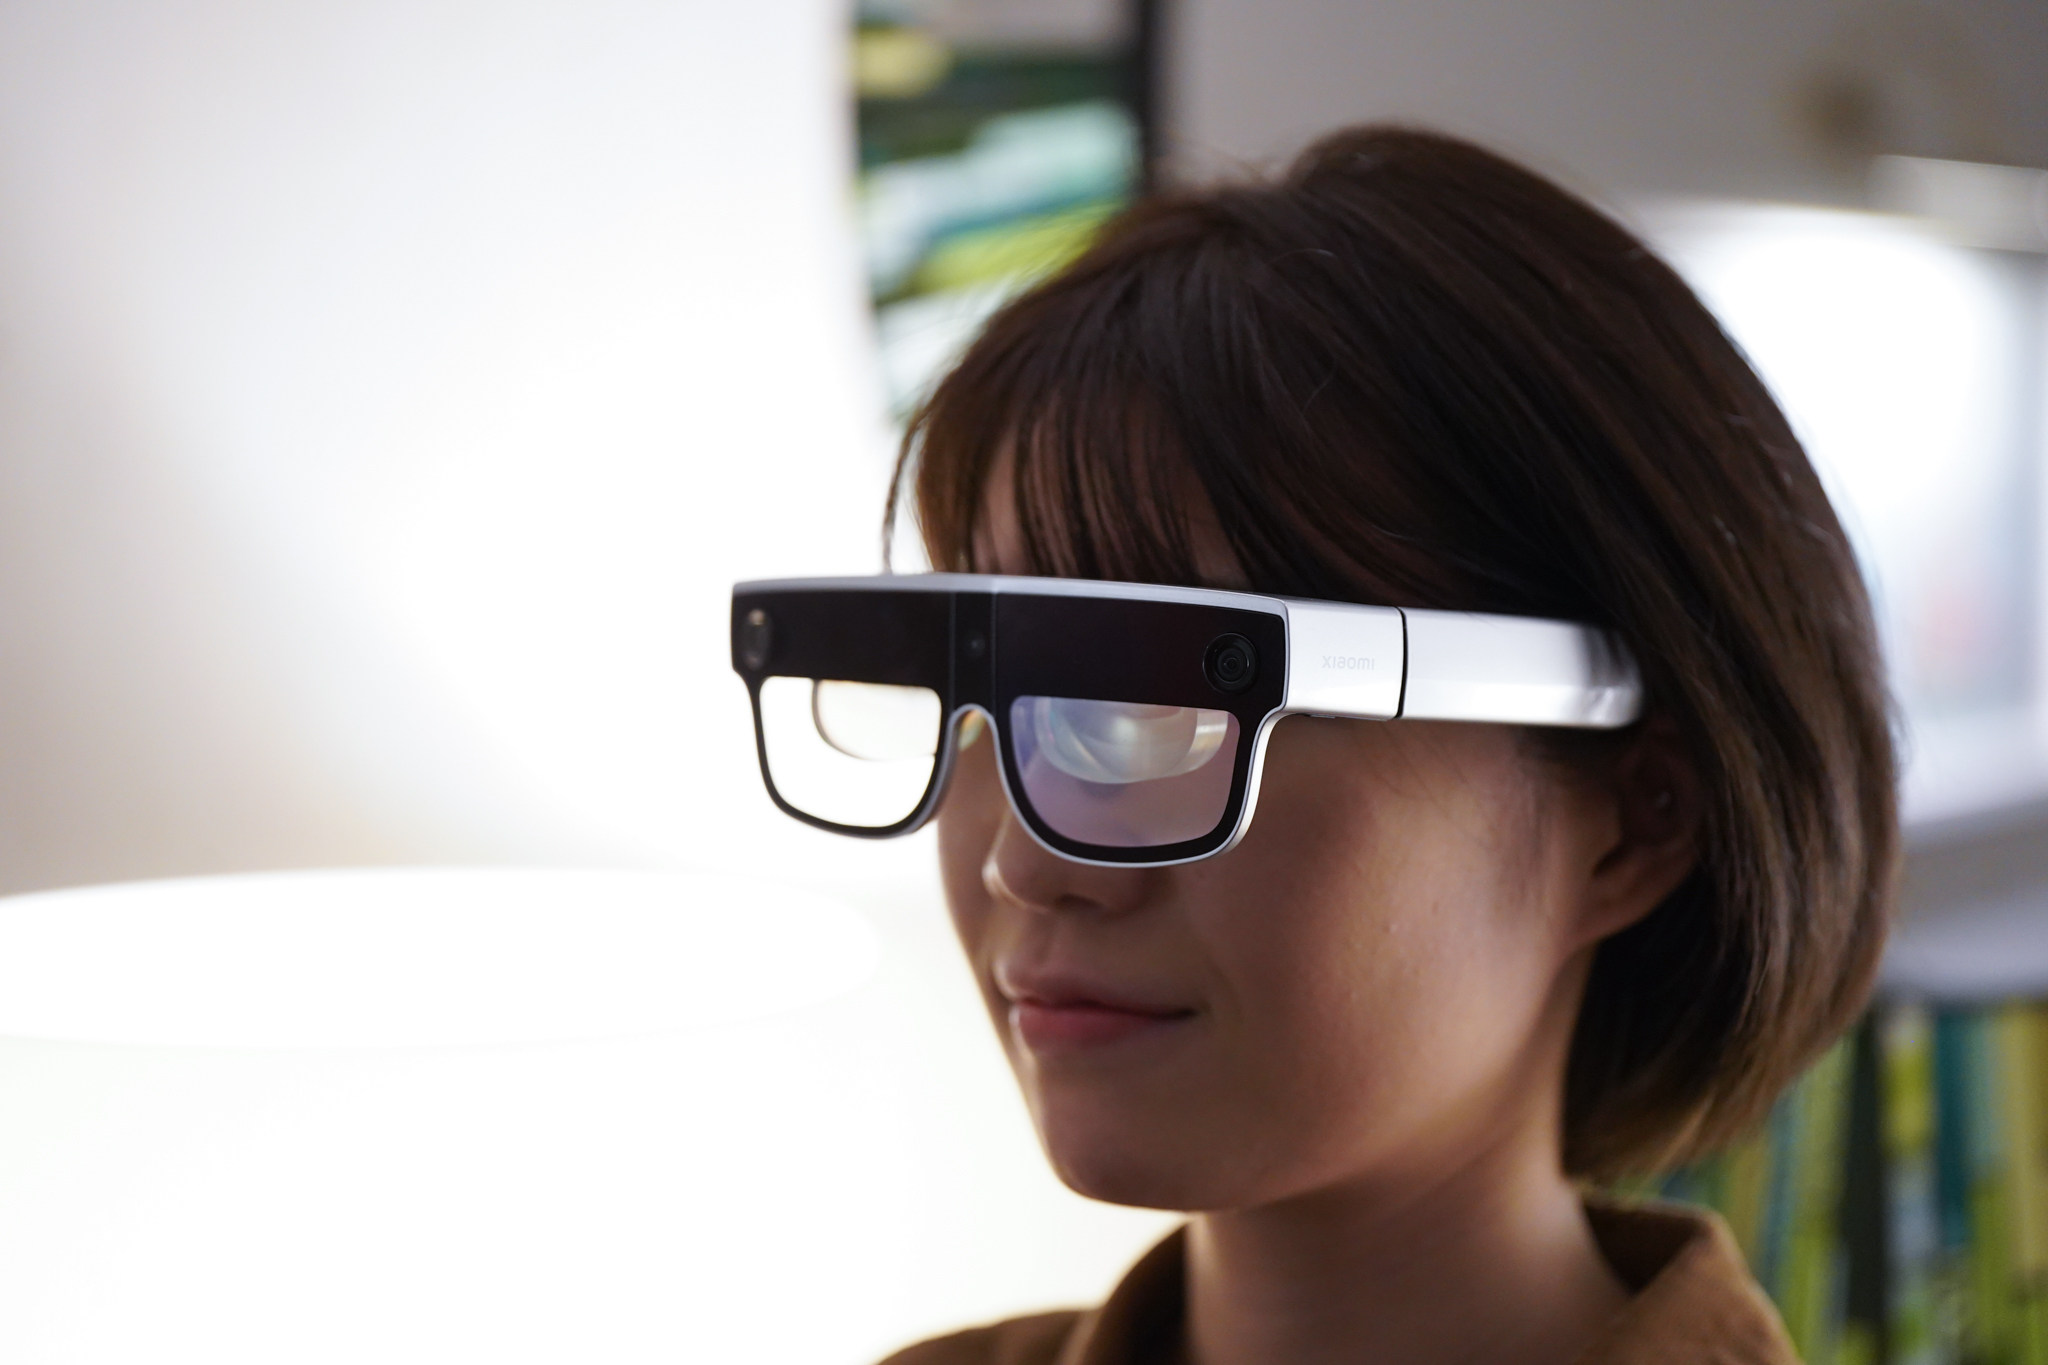 Xiaomi’s Wireless AR Smart Glass Explorer Edition prototype worn at this year’s Mobile World Congress, in Barcelona. The show introduced a range of cutting-edge mobile technology. Photo: Ben Sin